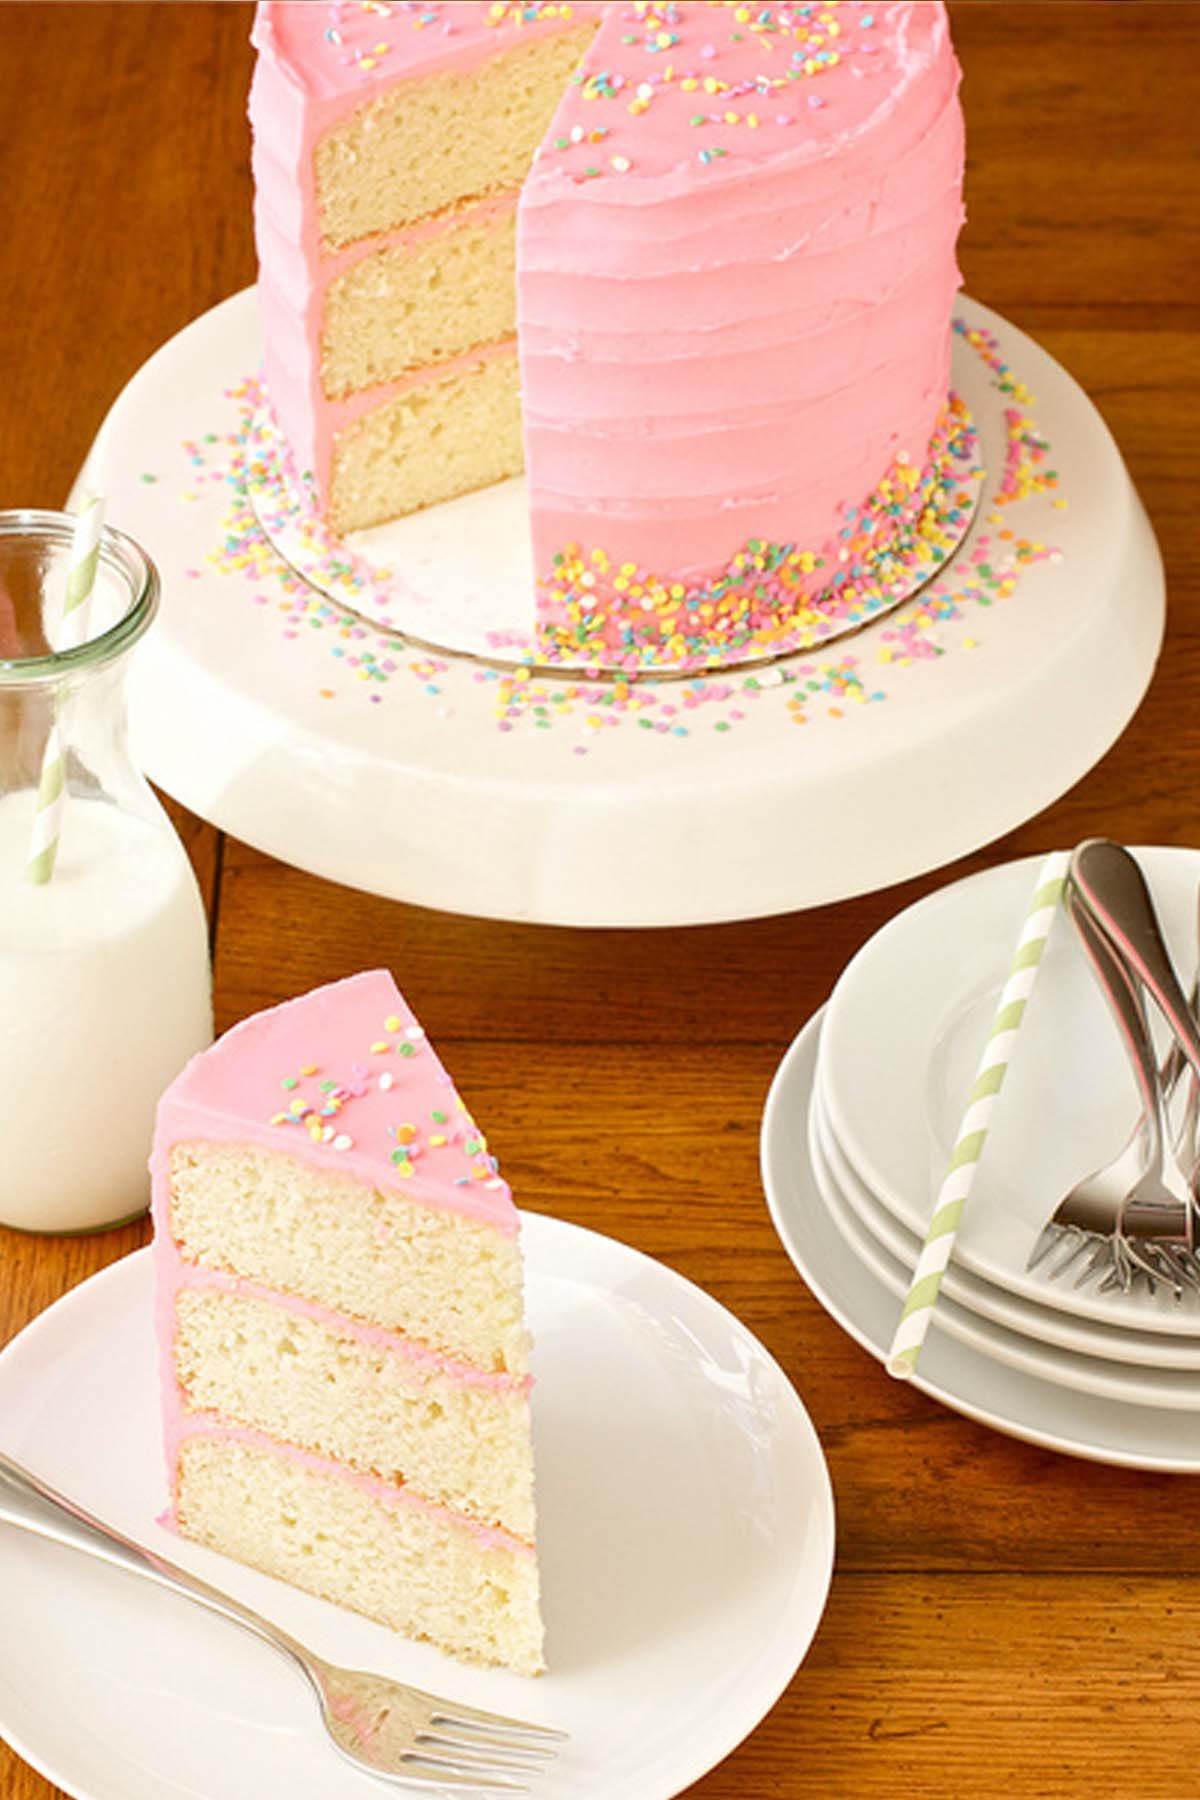 20 Cute Baby Shower Cakes for Girls and Boys - Easy Recipes Baby Dessert Ideas